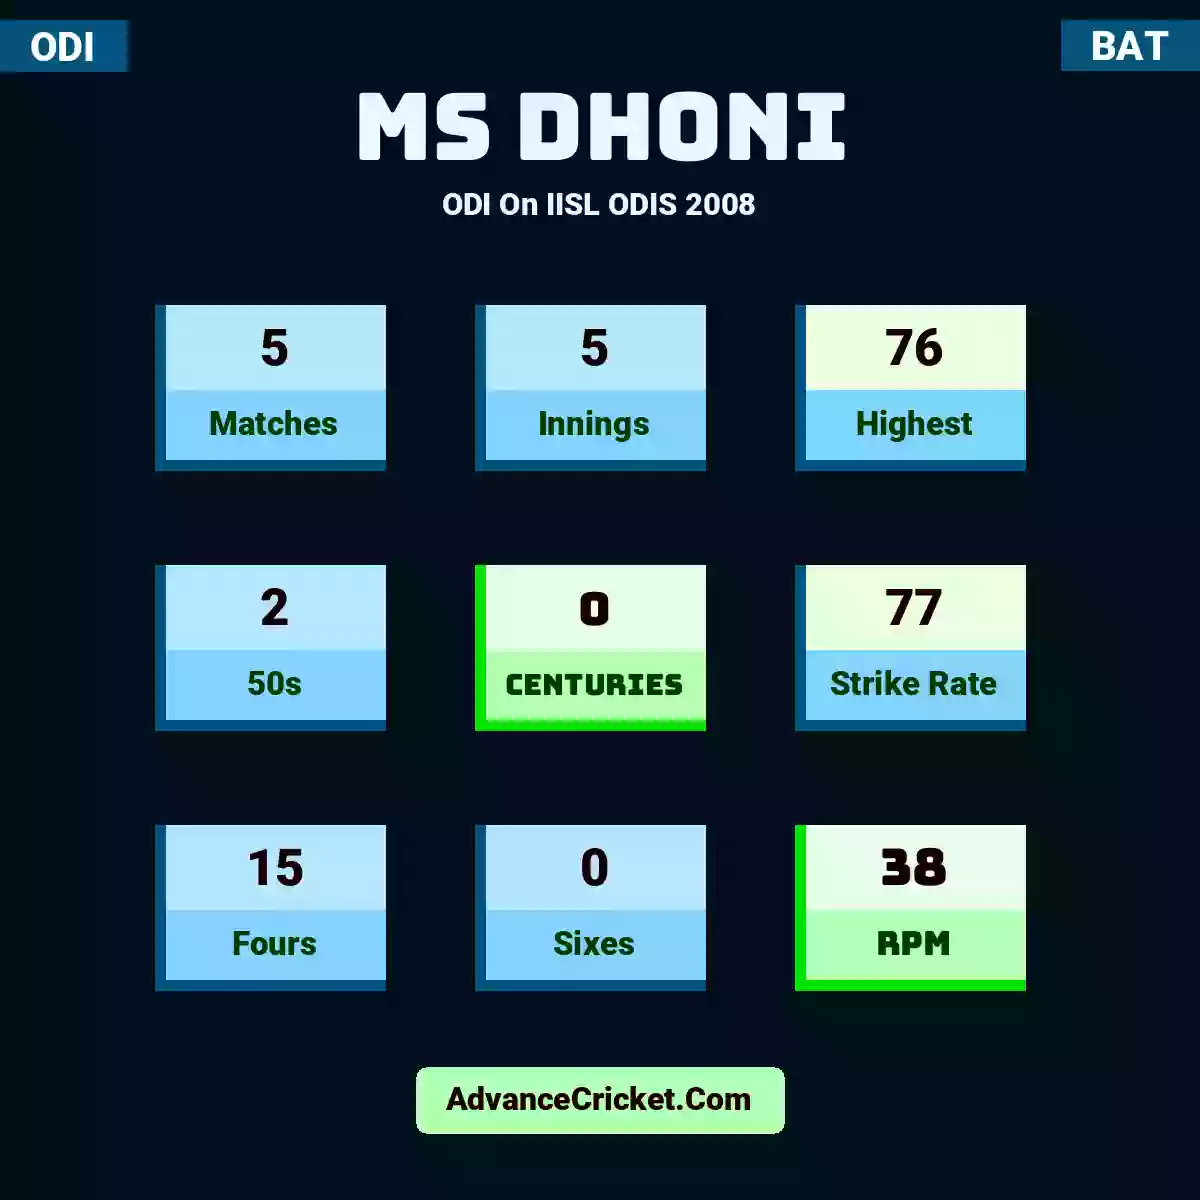 MS Dhoni ODI  On IISL ODIS 2008, MS Dhoni played 5 matches, scored 76 runs as highest, 2 half-centuries, and 0 centuries, with a strike rate of 77. M.Dhoni hit 15 fours and 0 sixes, with an RPM of 38.